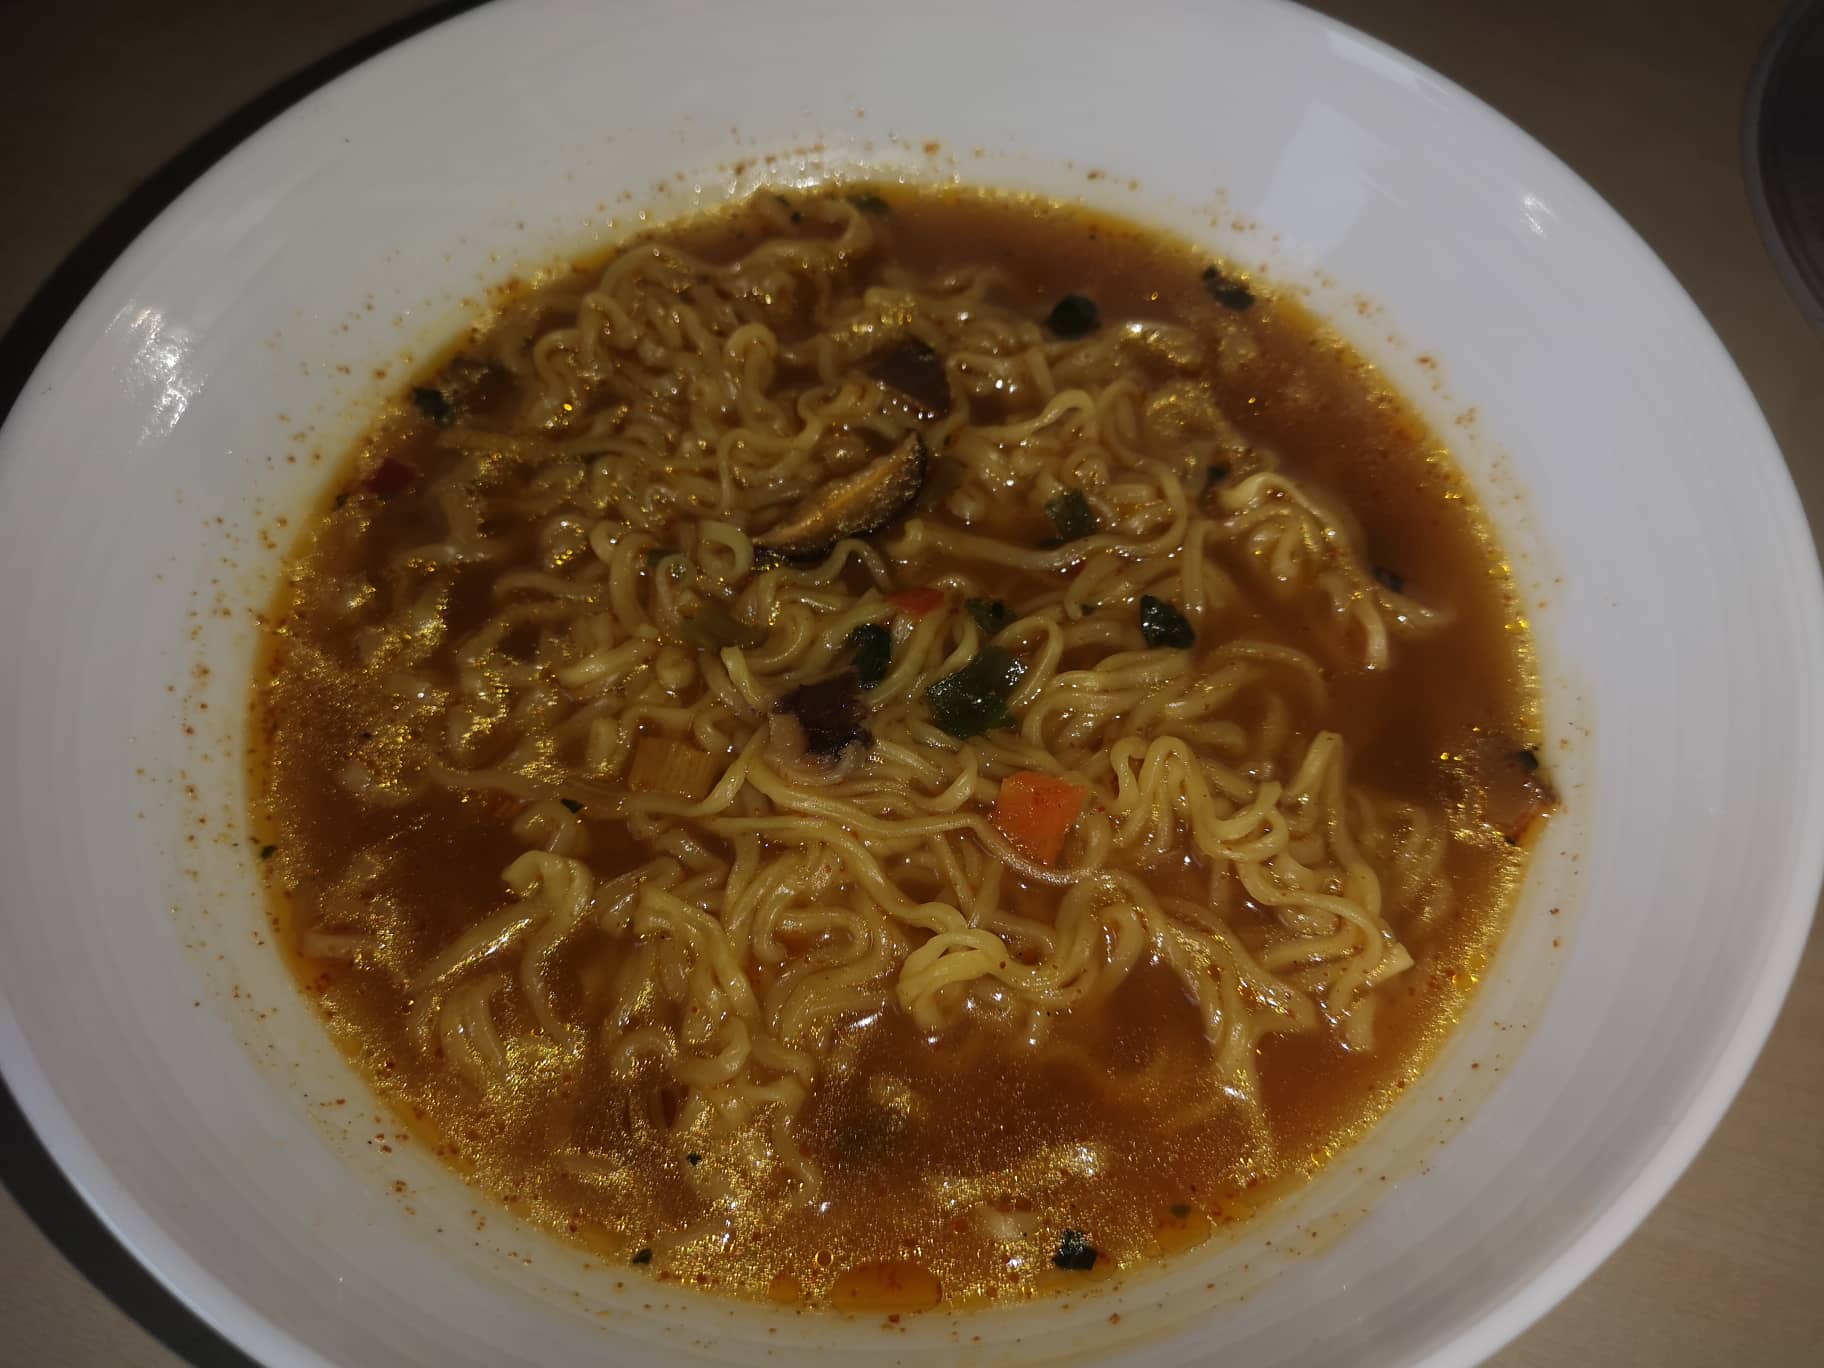 #1757: Nongshim "Non-Frying Shin Ramyun Hot & Spicy Instant Noodle" (Update 2022)